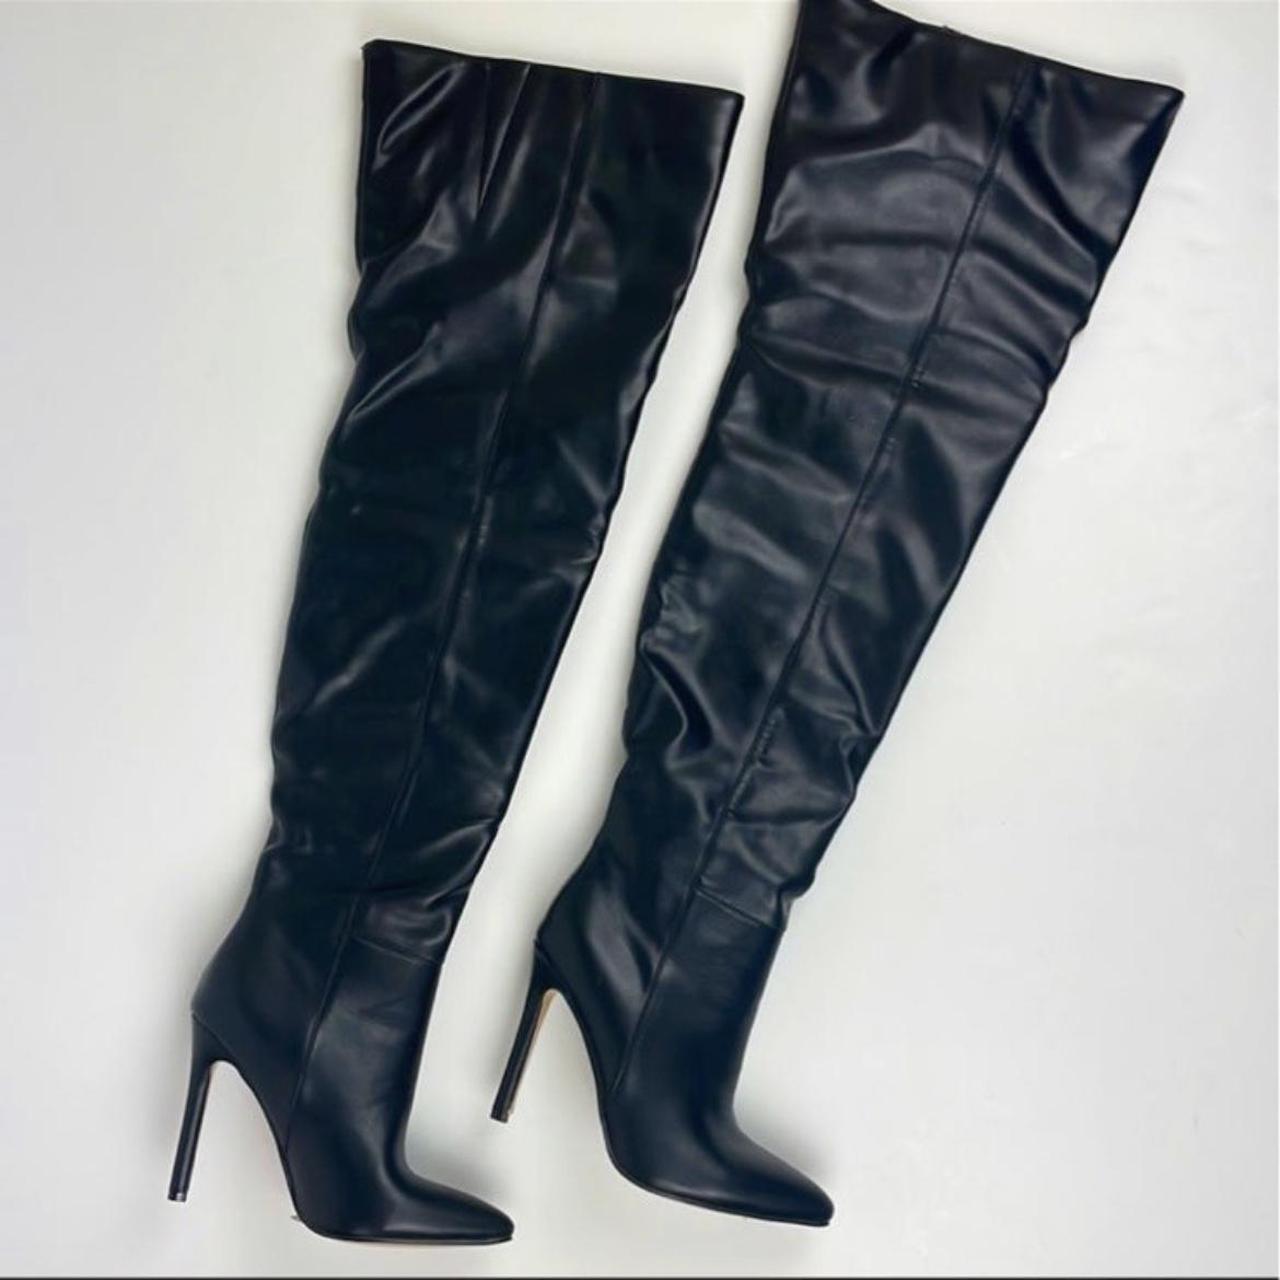 PLT Thigh High Stiletto Boots New without box.... - Depop